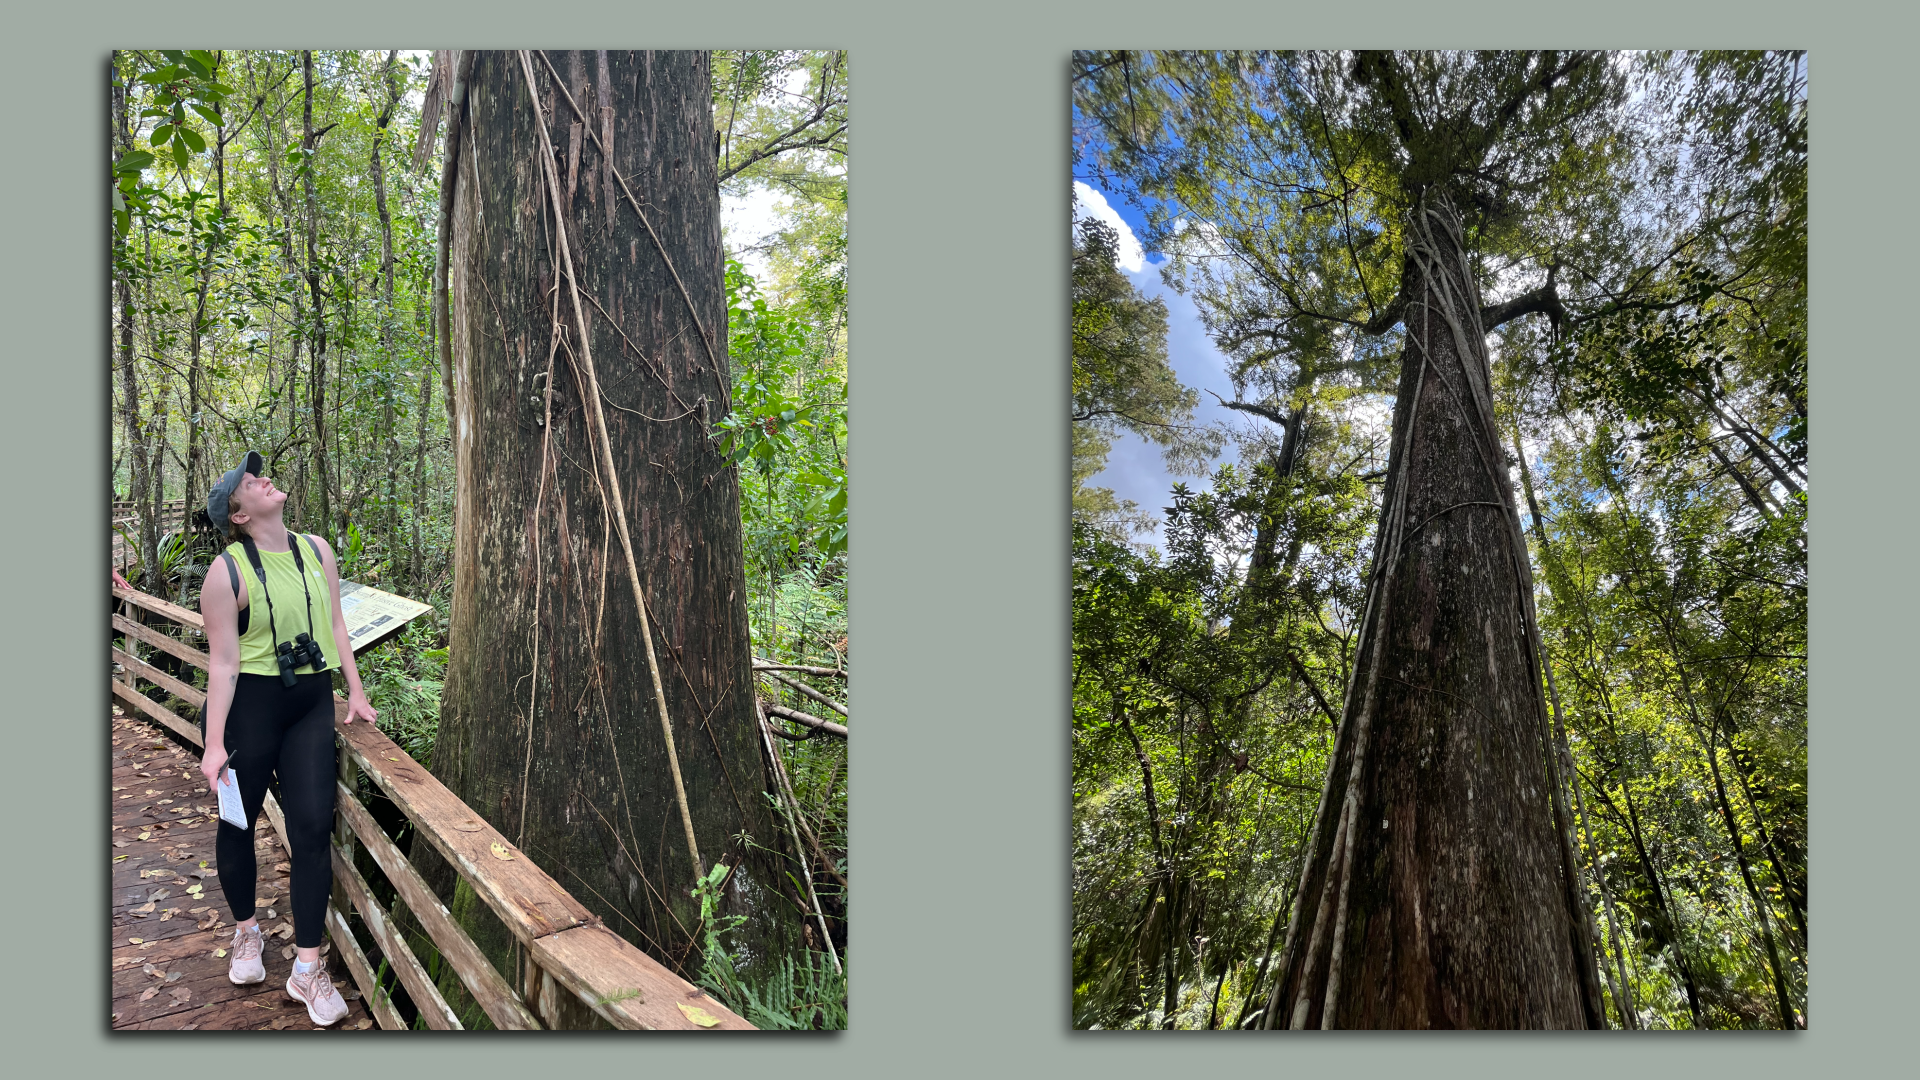 Two photos, one of a woman staring up at a tree trunk three times her size, the other showing the length of another tree trunk.